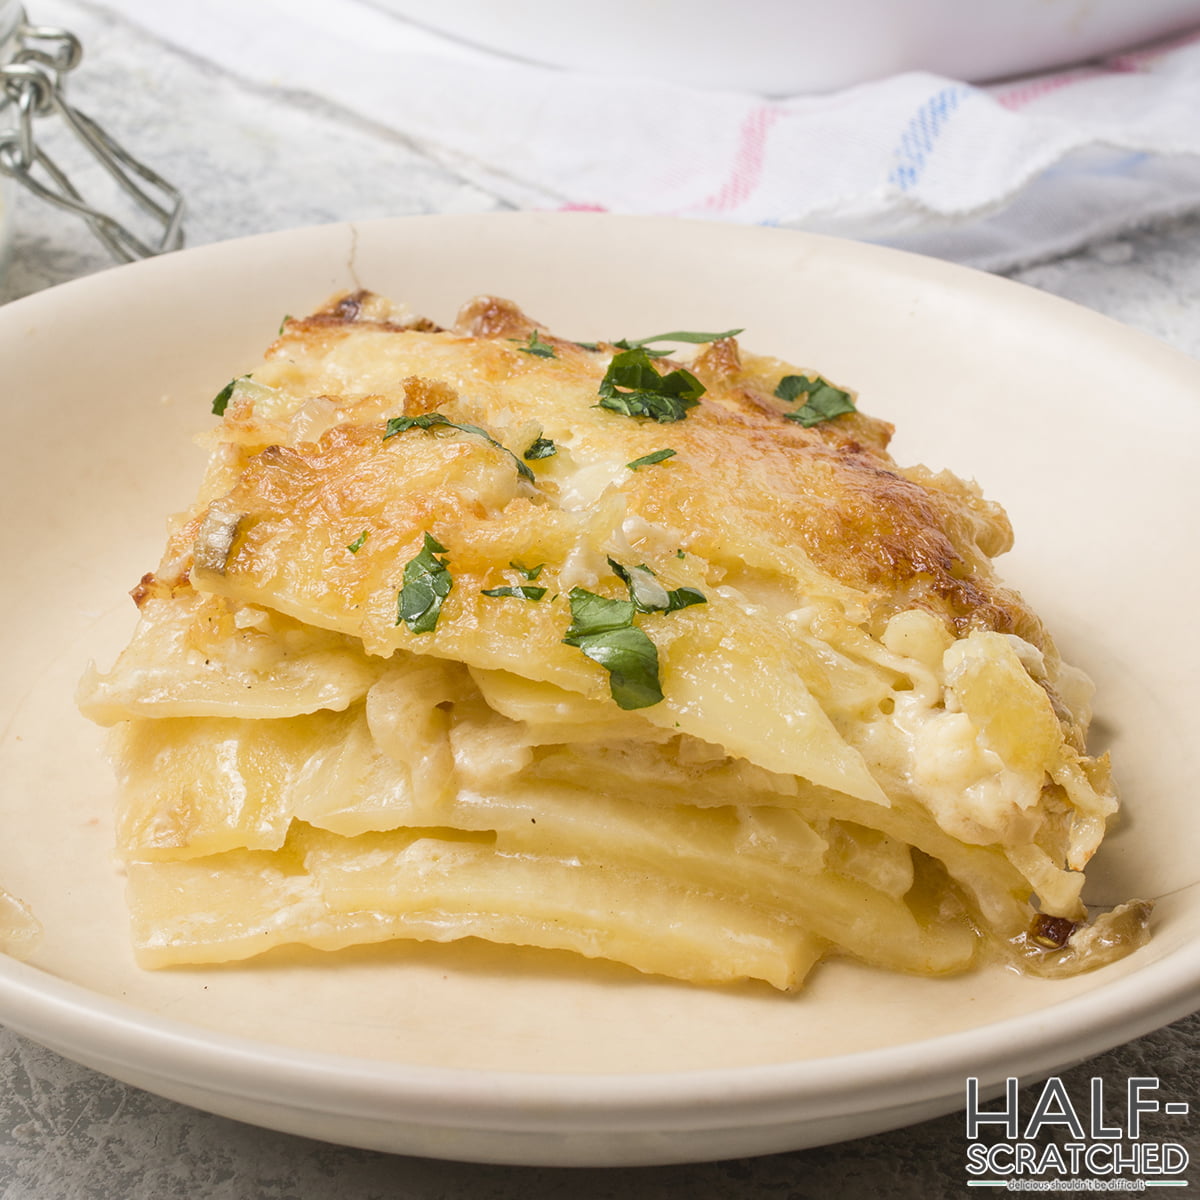 Scalloped potatoes in plate